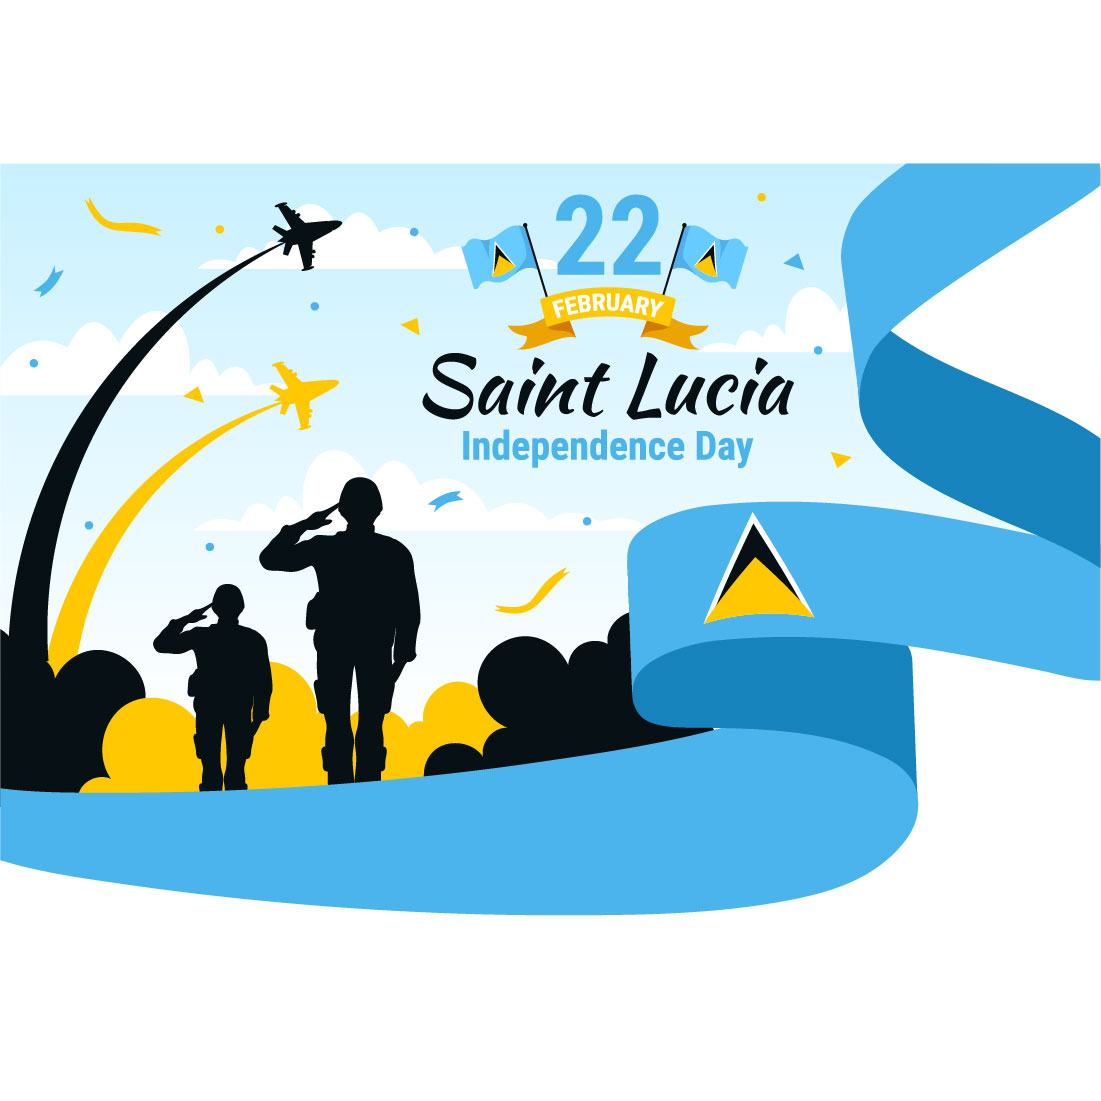 13 Saint Lucia Independence Day Illustration cover image.